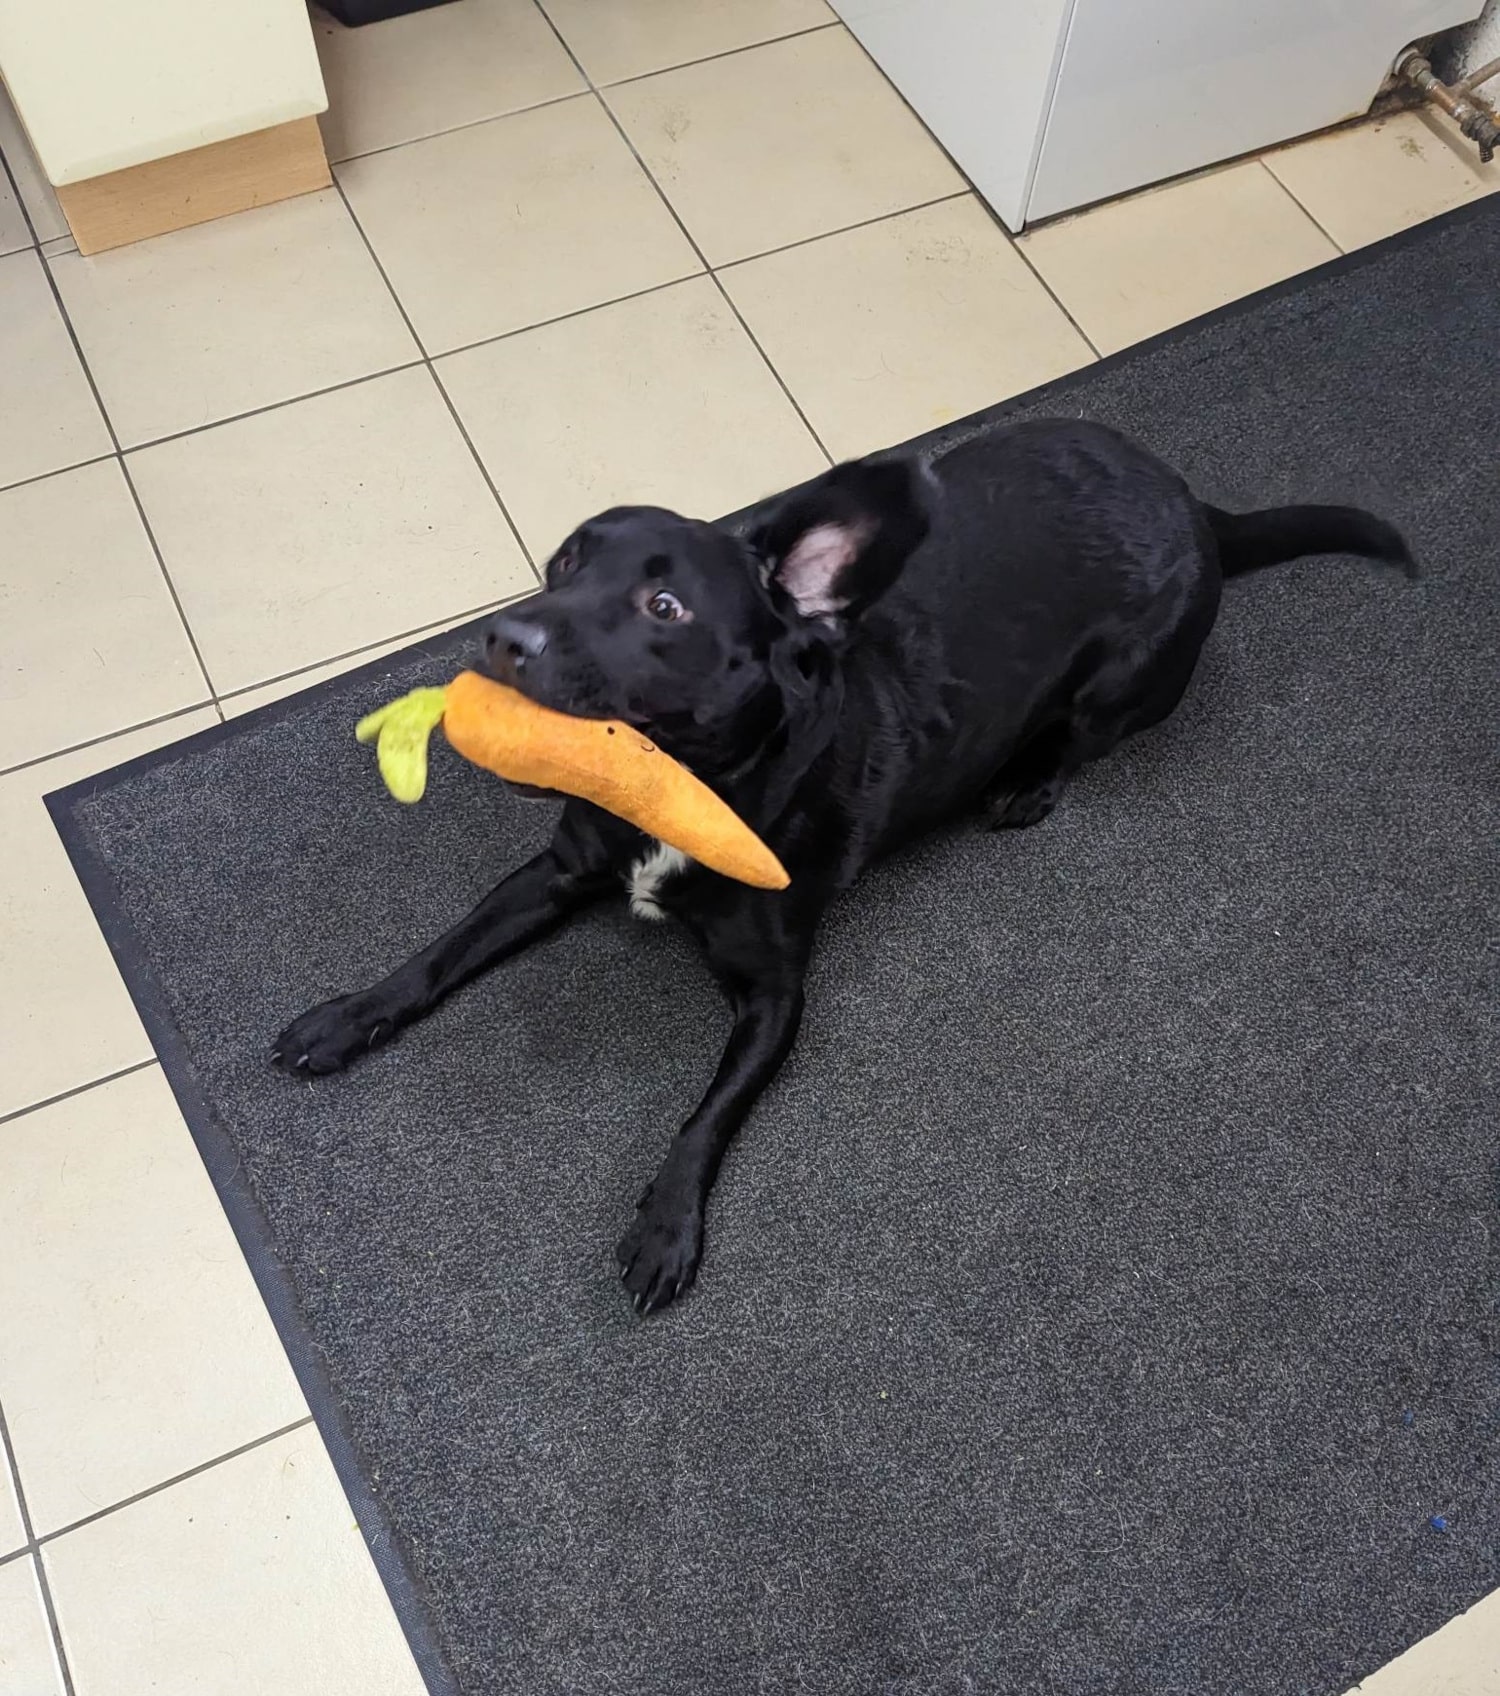 Photo of a dog playing with a toy carrot.